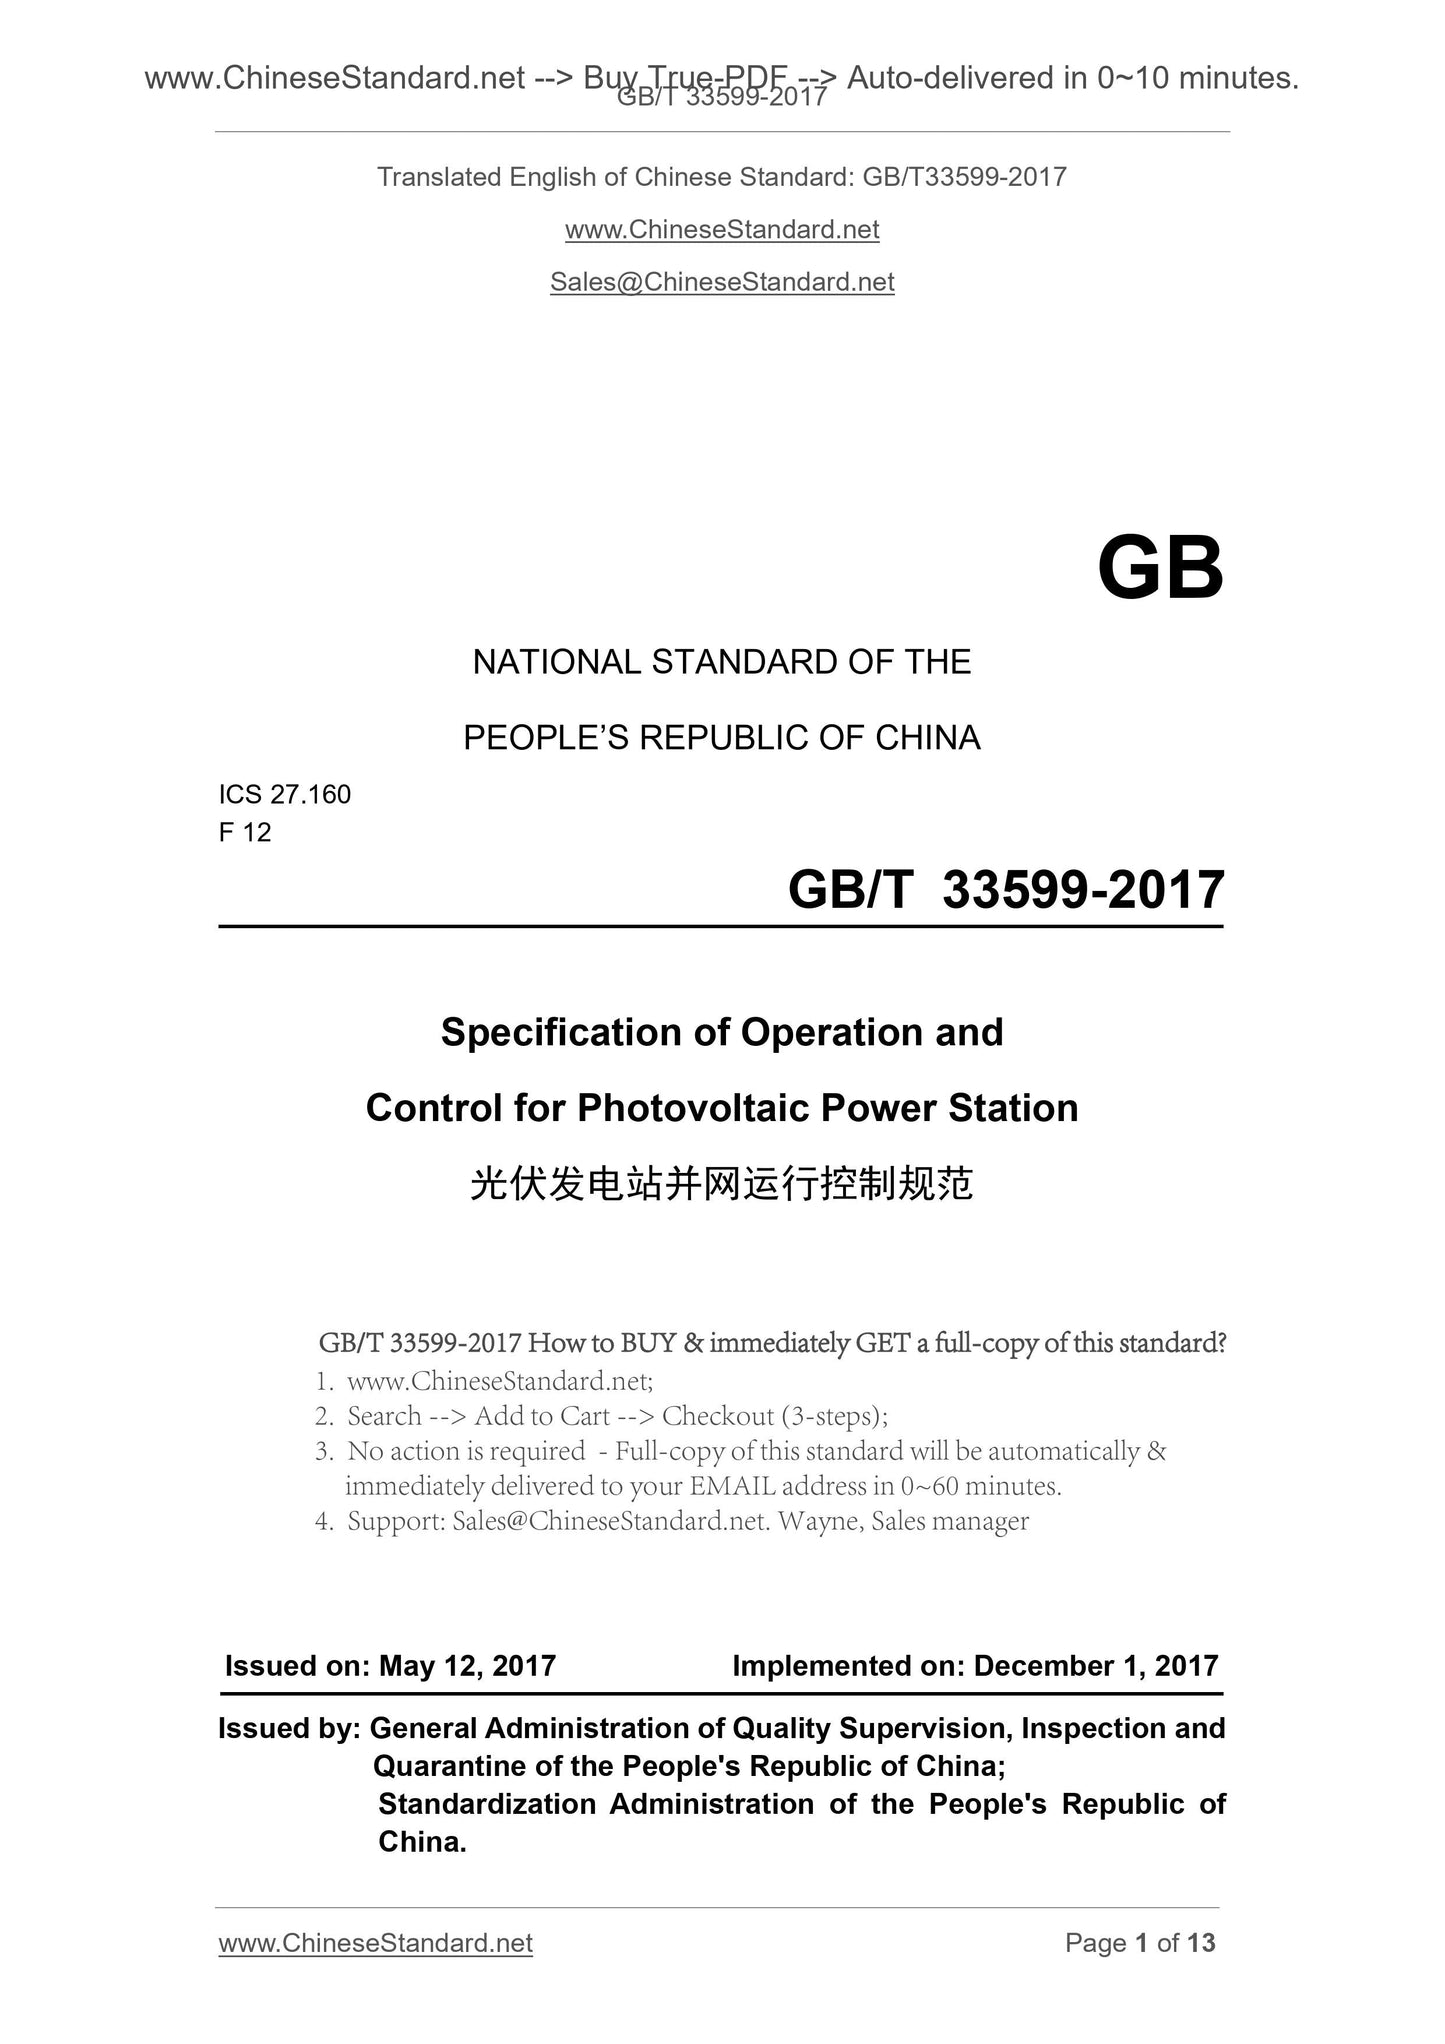 GB/T 33599-2017 Page 1